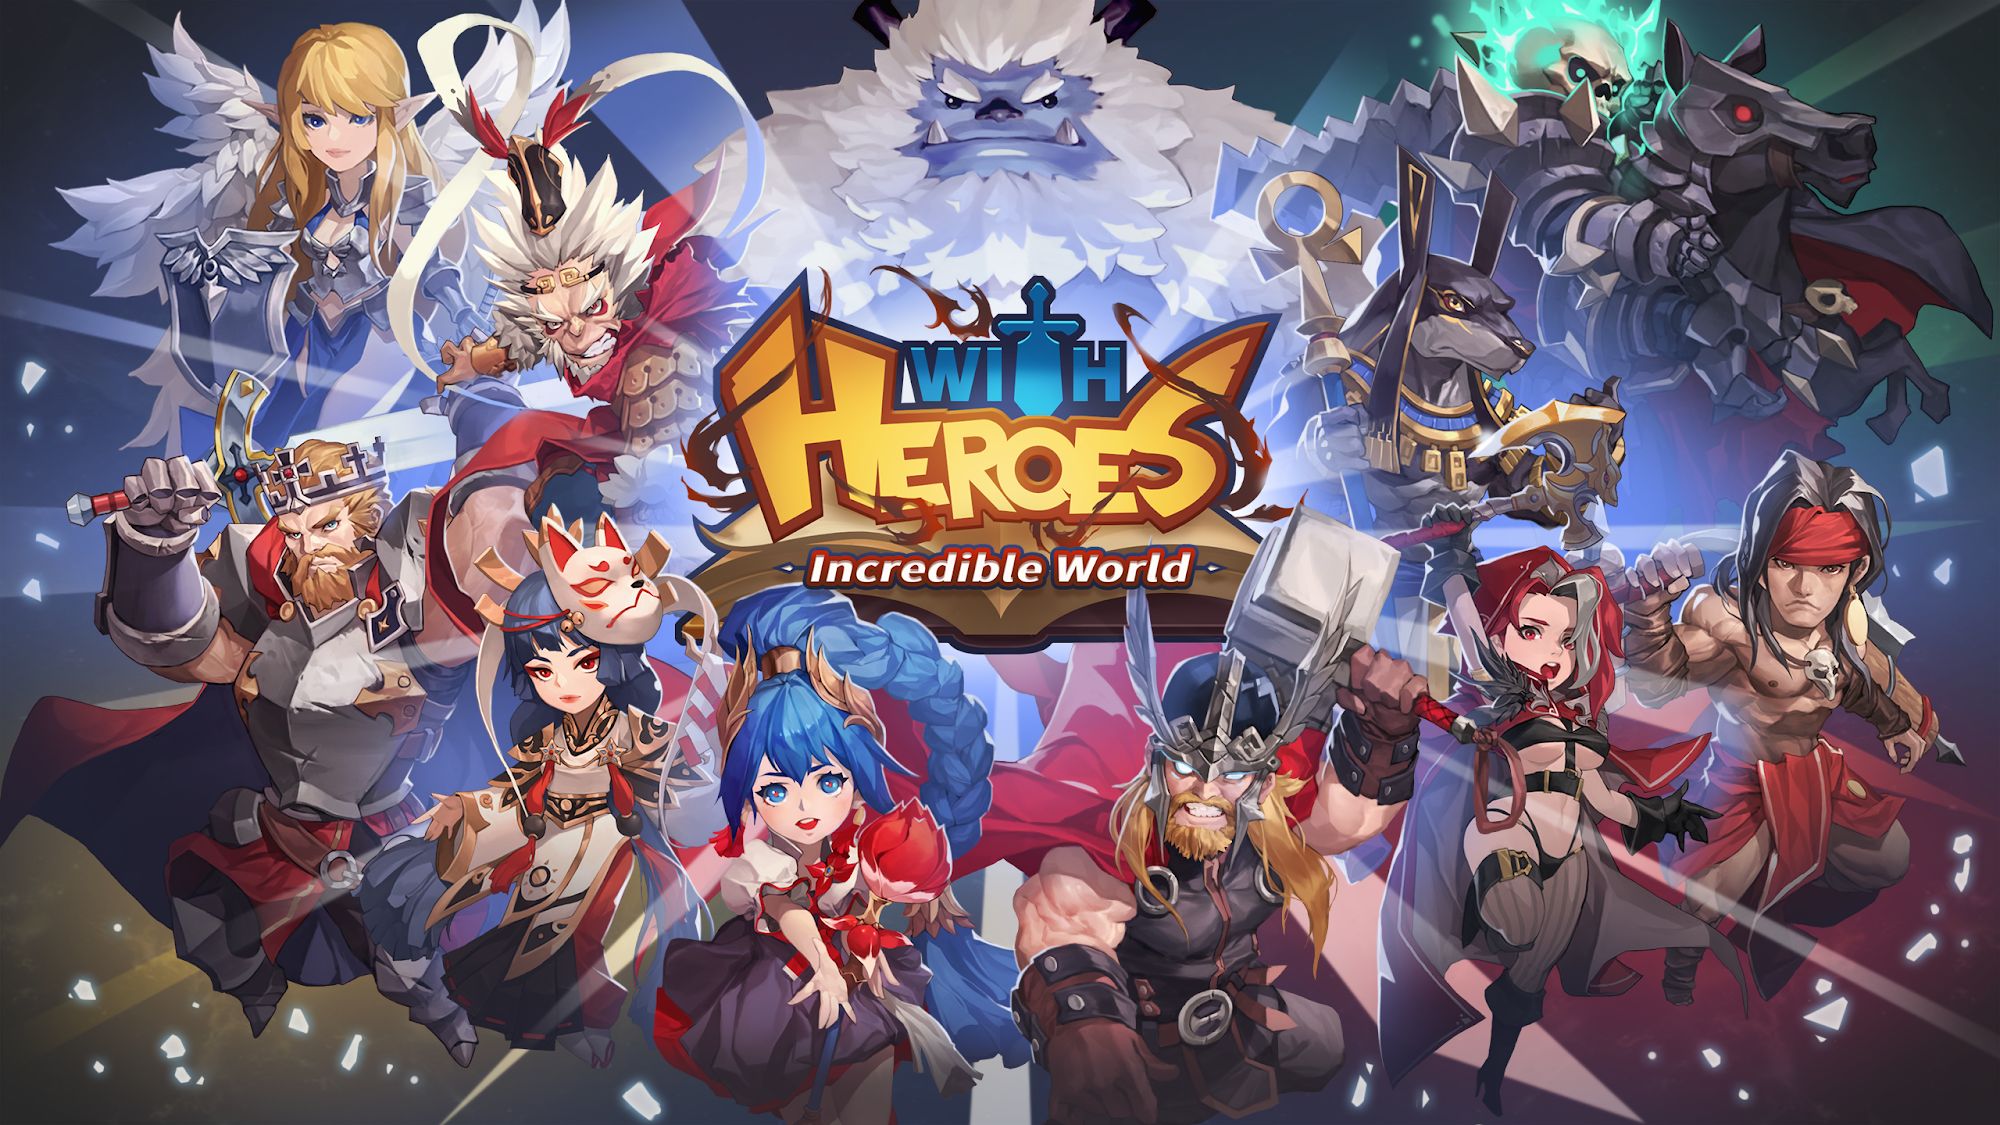 WITH HEROES - IDLE RPG for Android